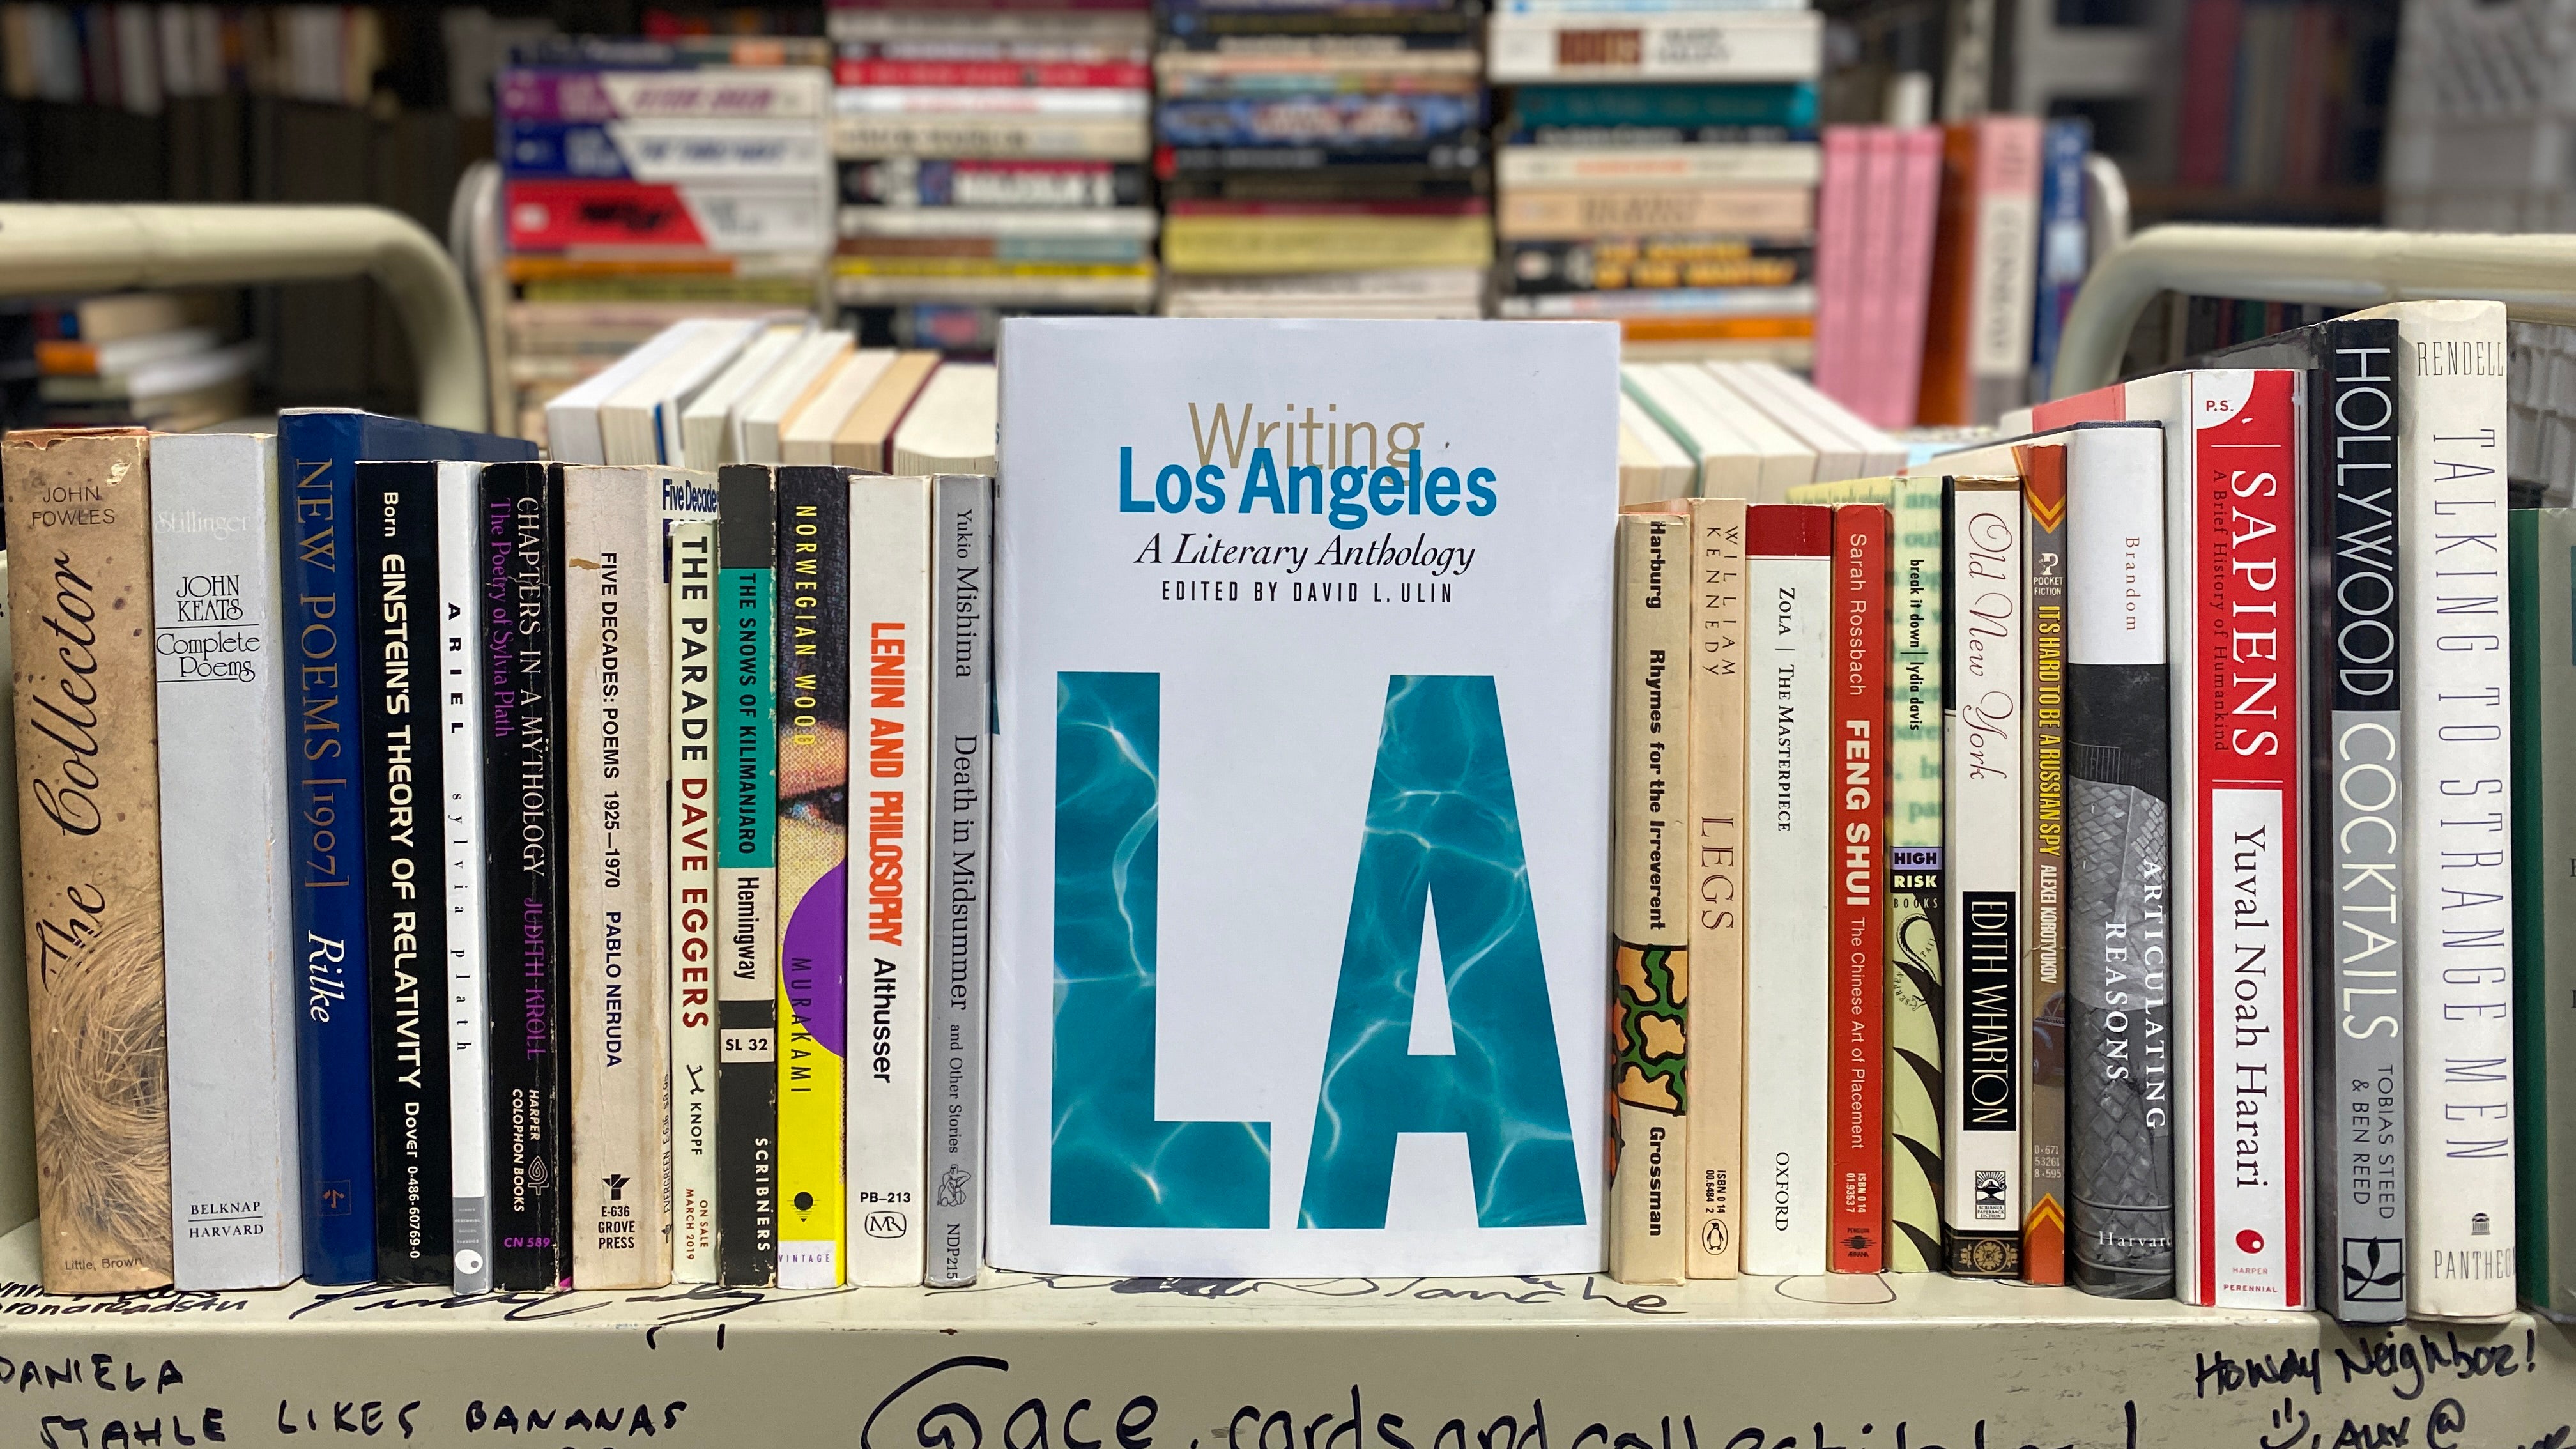 Story Sales on Instagram Stories each Thursday at 3pm (pst) / 6pm (est). A Good Used Book is an Independent online bookstore selling New, Used and Vintage books based in Los Angeles, California. AAPI-Owned Small Business. Free Shipping on orders $40+.